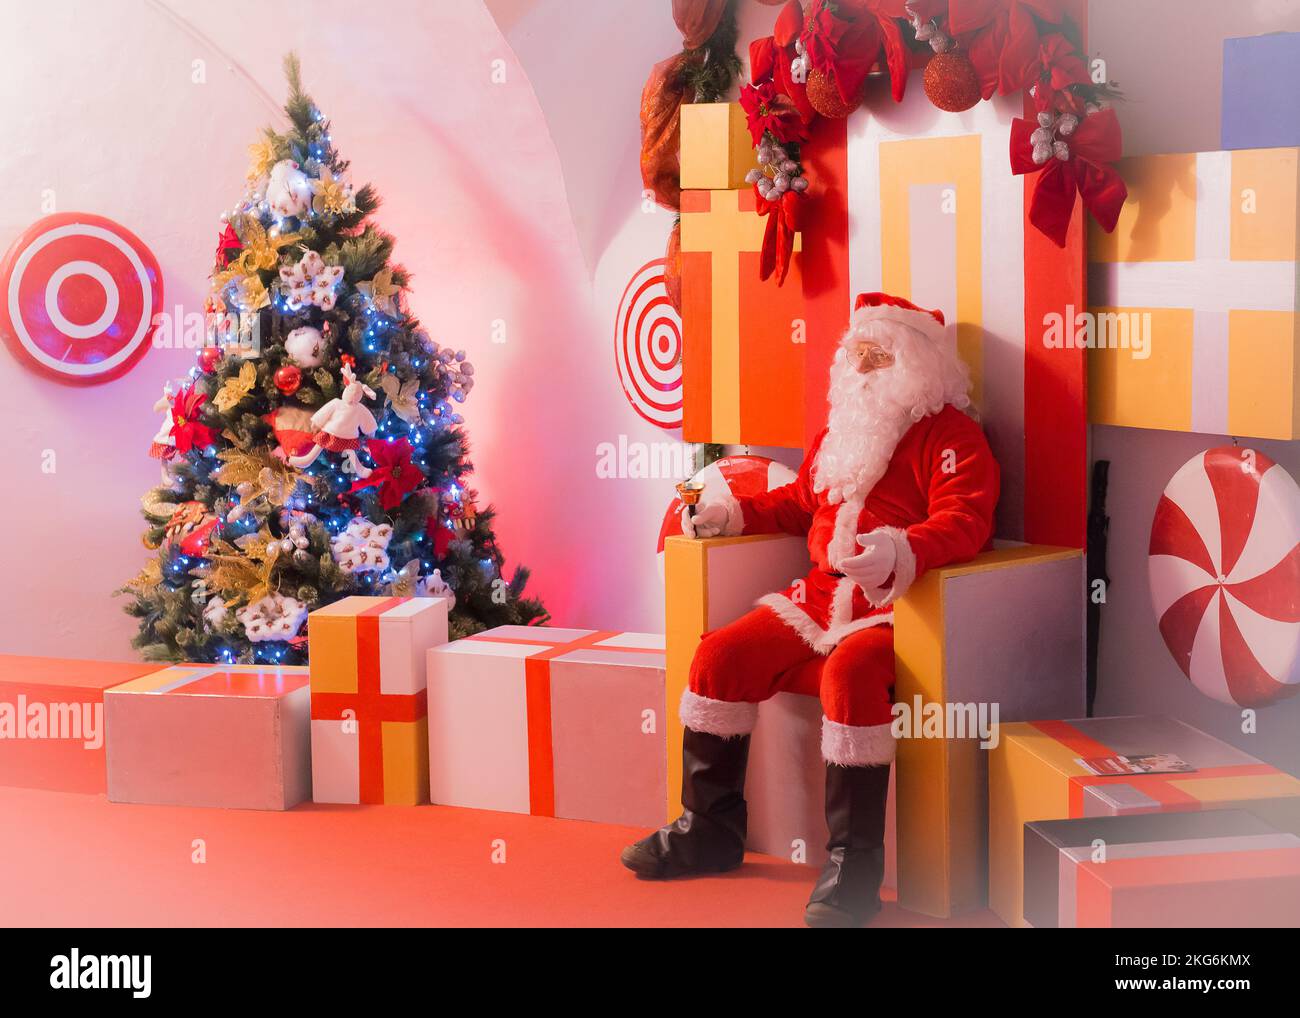 Magic atmosphere in the Christmas  with Santa Claus Stock Photo